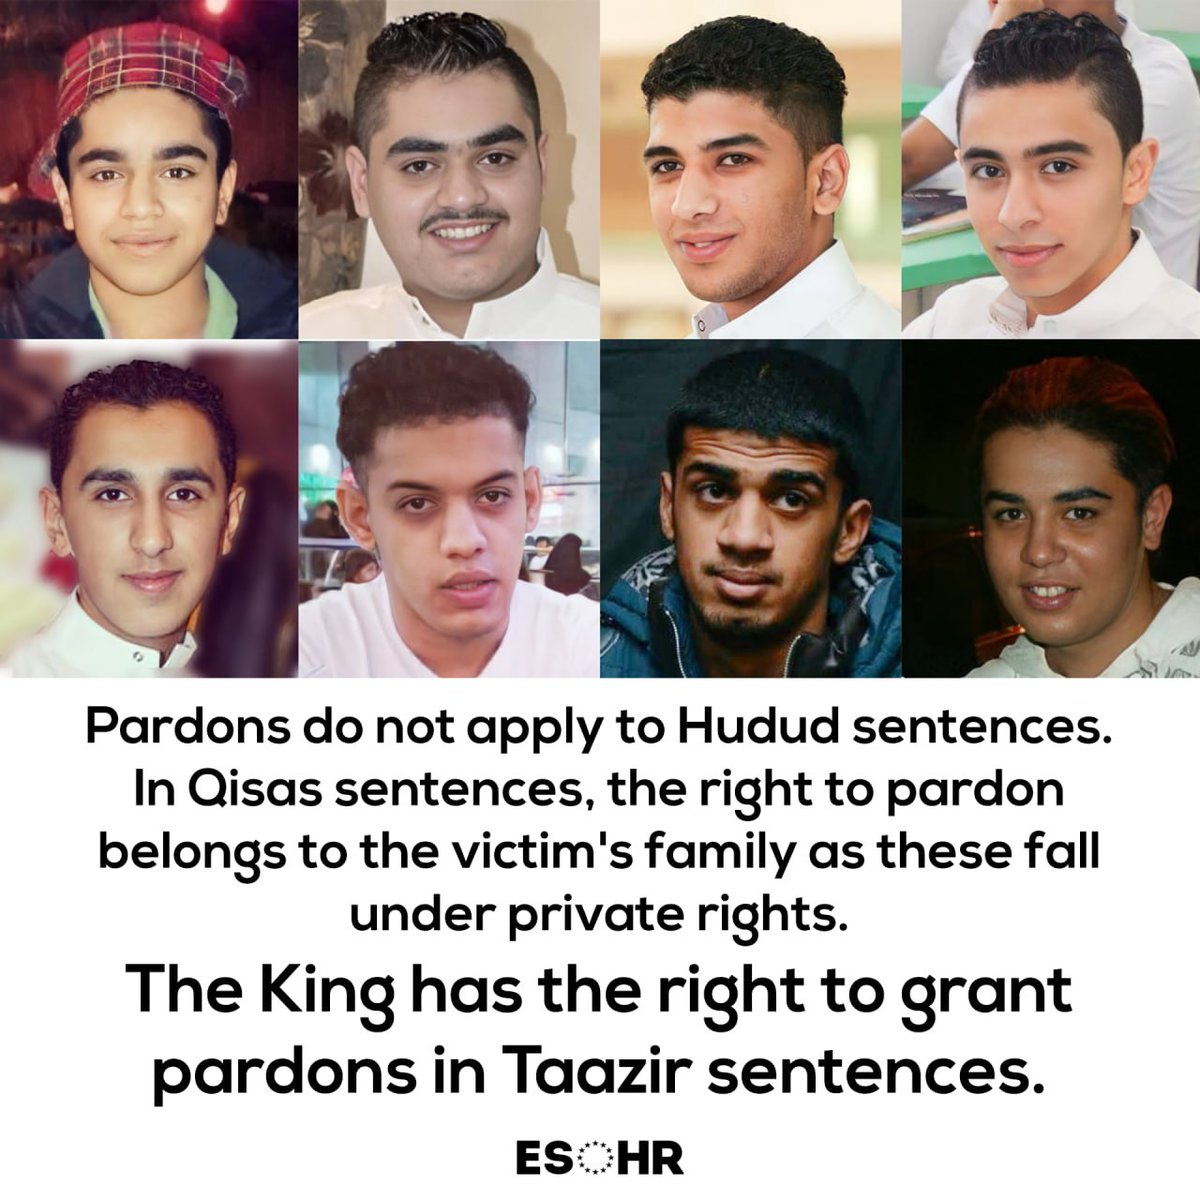 🔴 The King Signs Off on Death Sentences and Withholds Pardons Pardon is not a favour, but a right. 8 minors are sentenced to Taazir death, and the king has the power to pardon them. cutt.ly/4etRJnwM #StopTheSlaughter